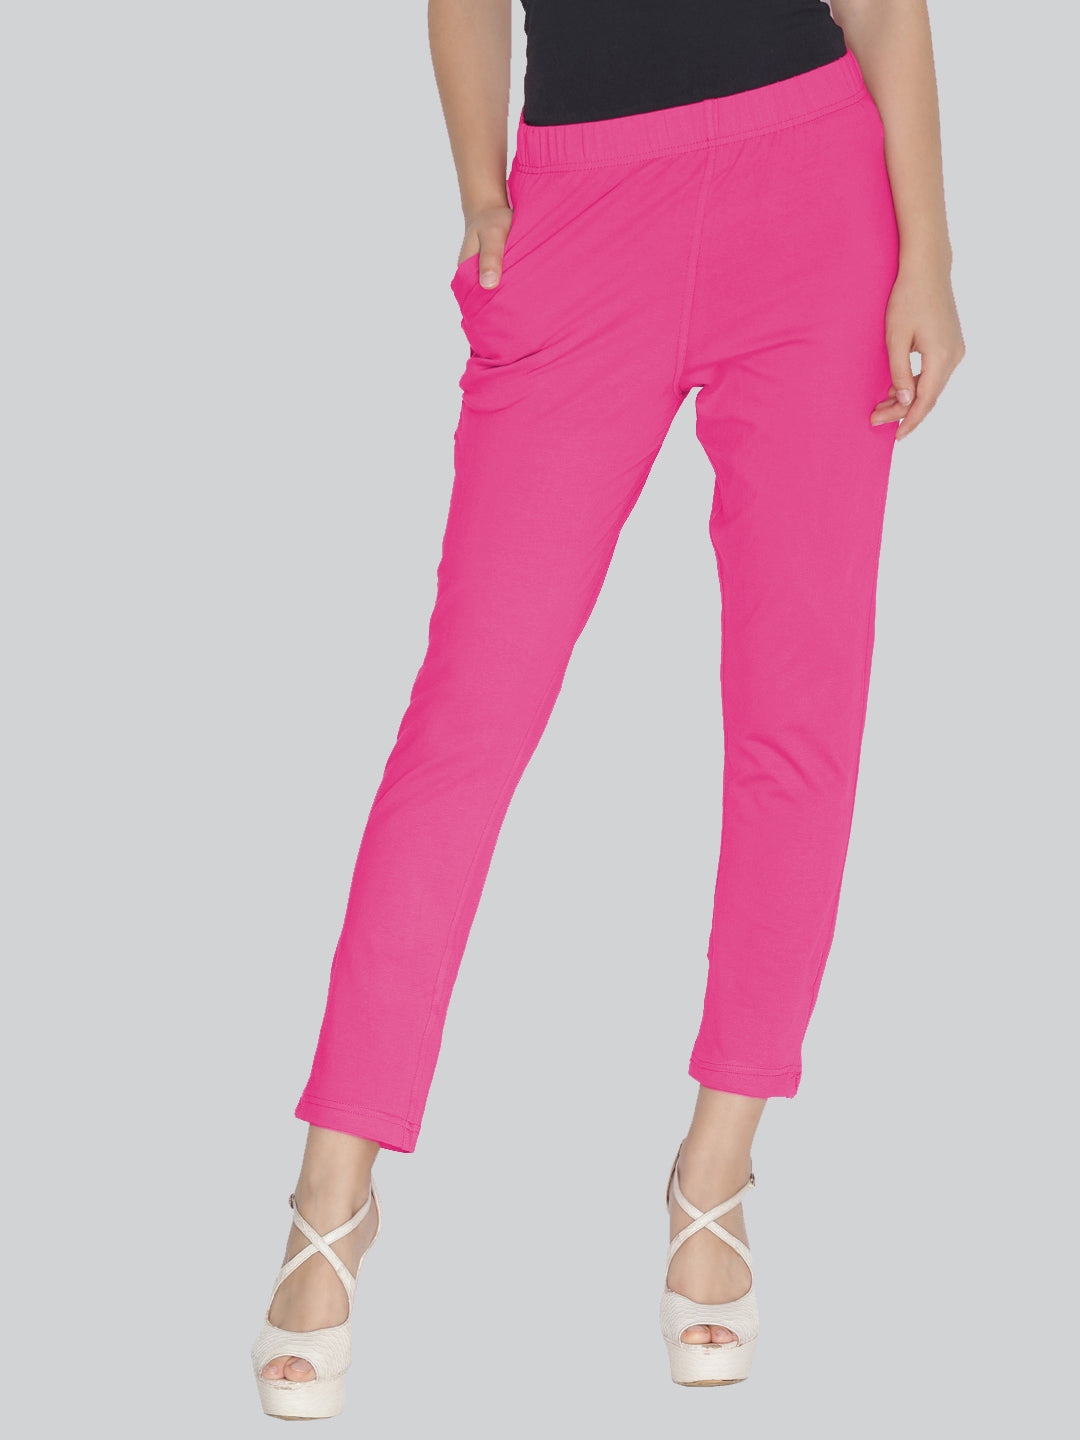 Dries Van Noten Pink Cropped Trousers In 305 Pink | ModeSens